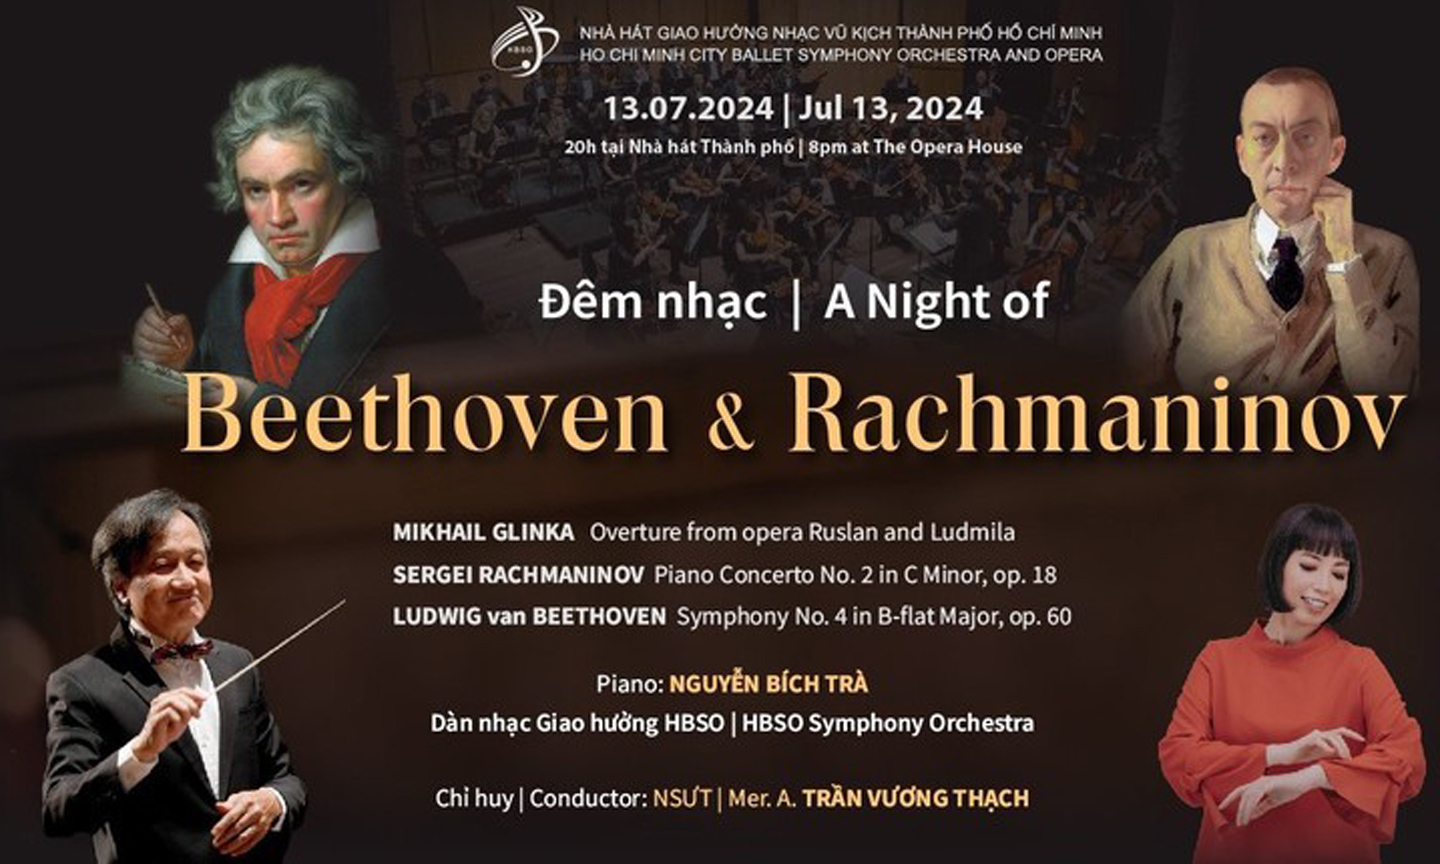 Ho Chi Minh City concert to feature masterpieces by Beethoven and Rachmaninov